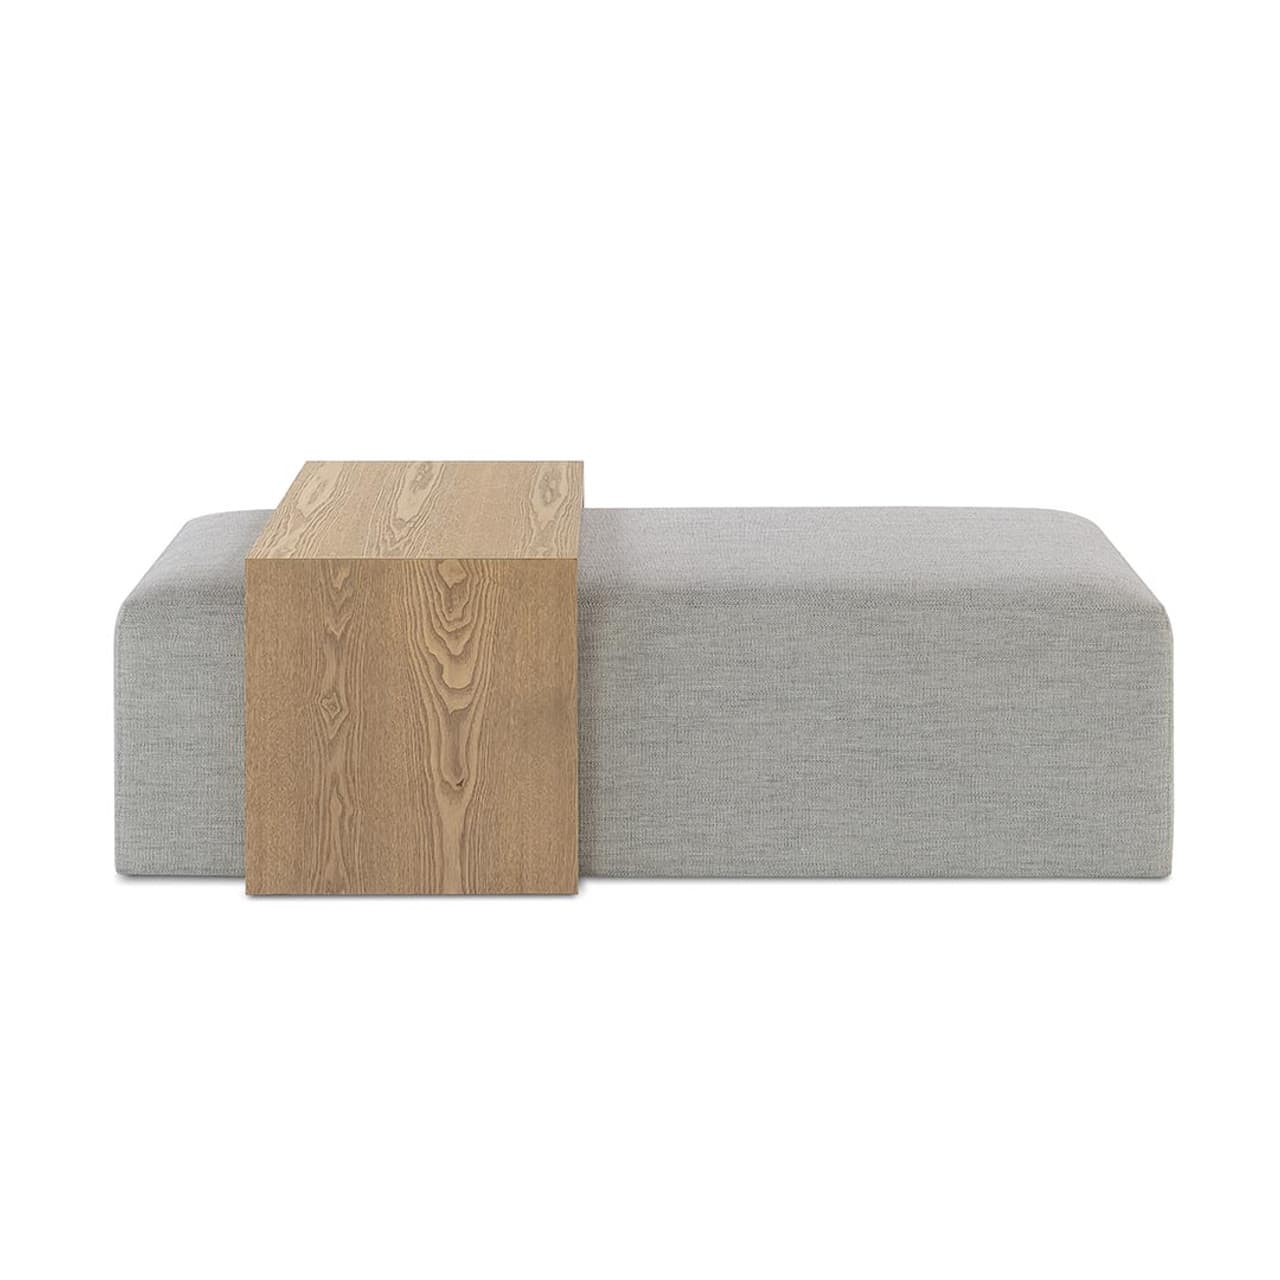 Backwoods Coffee Table in Stone